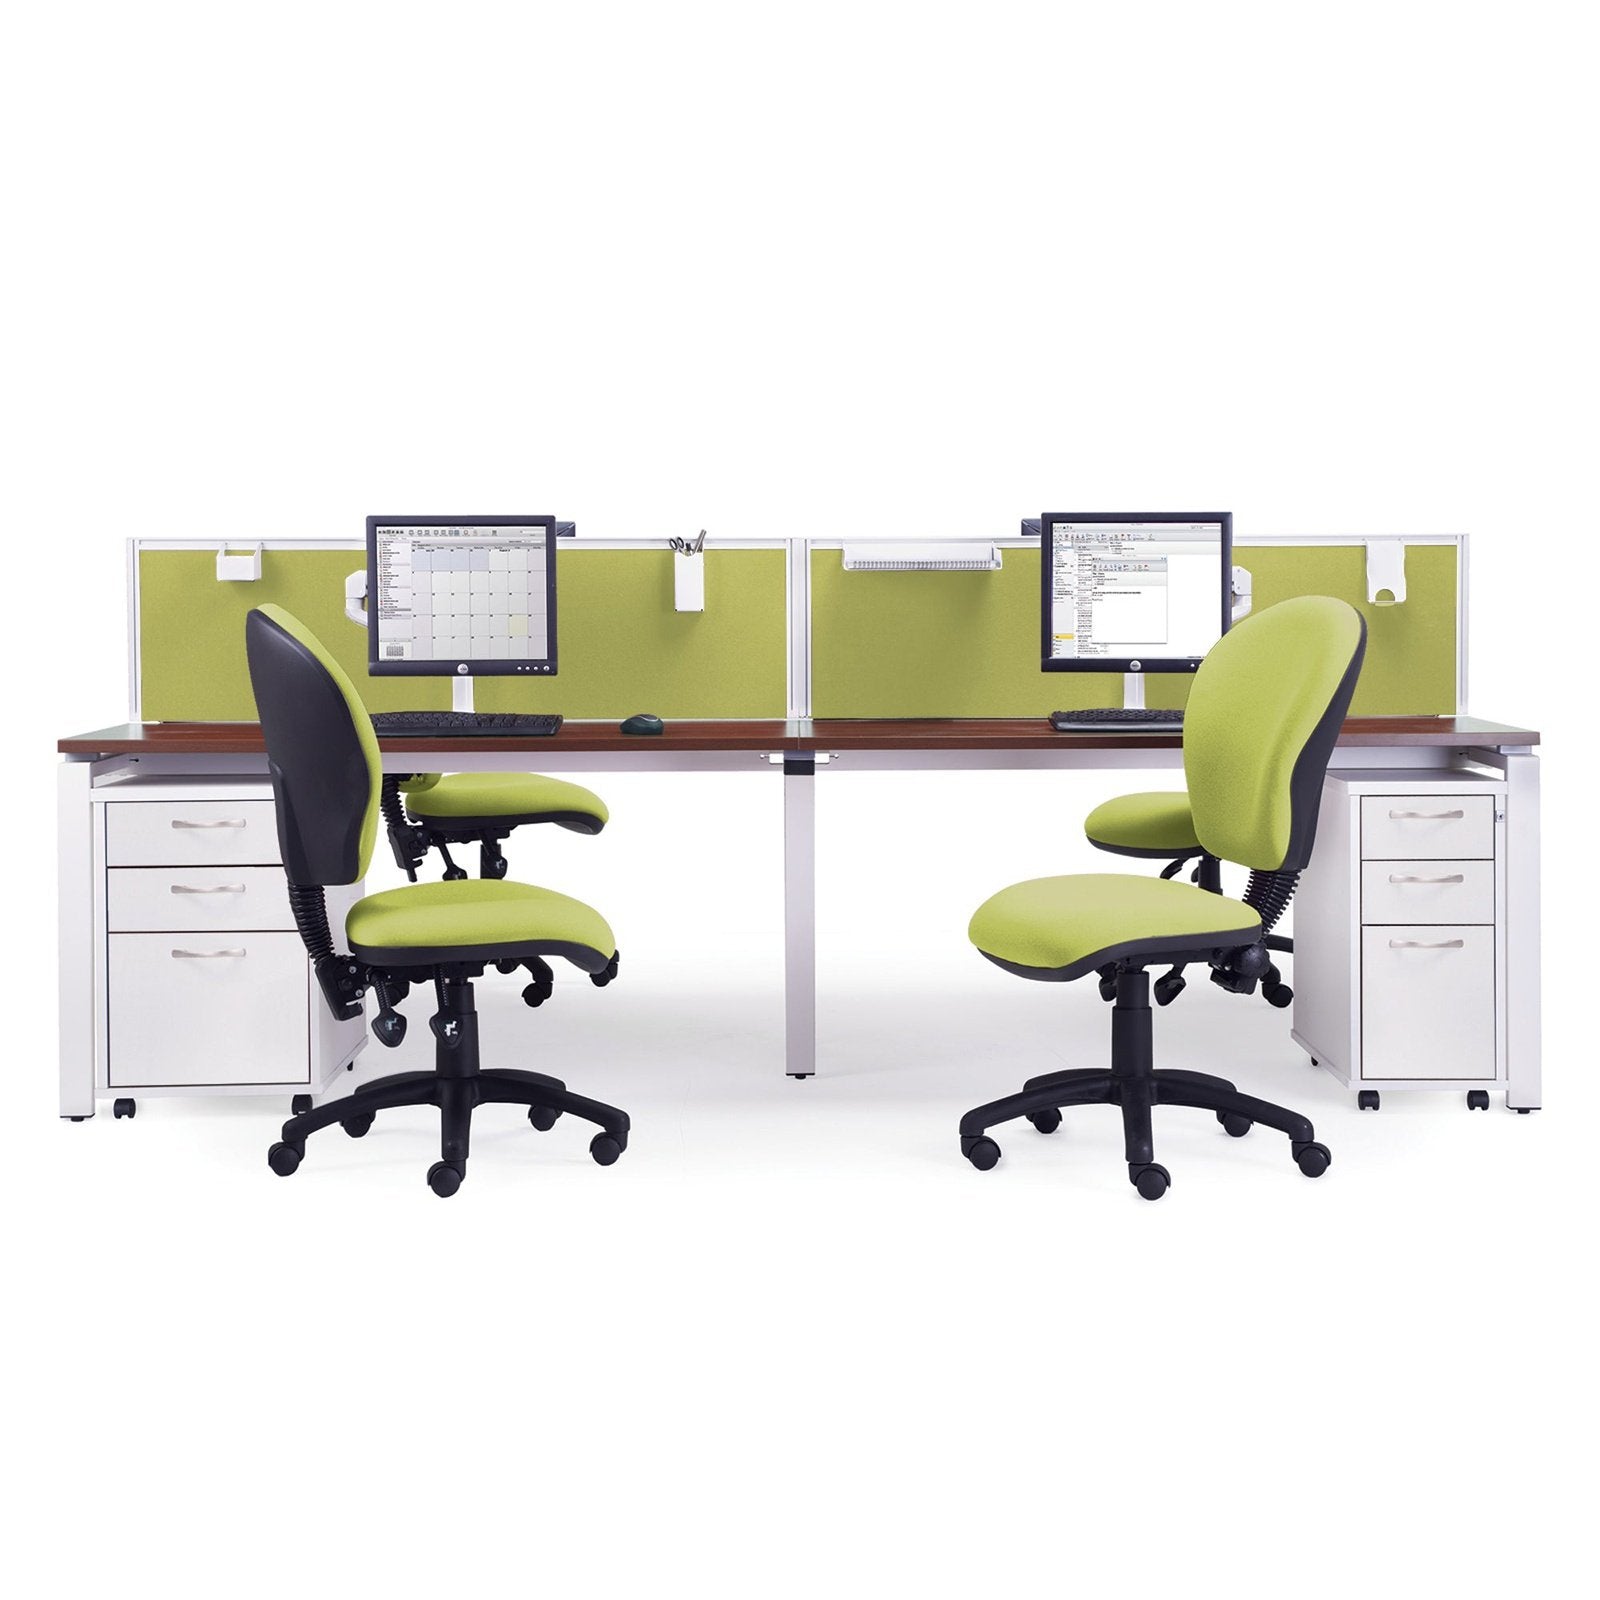 Adapt starter units to back 1200 deep - Office Products Online